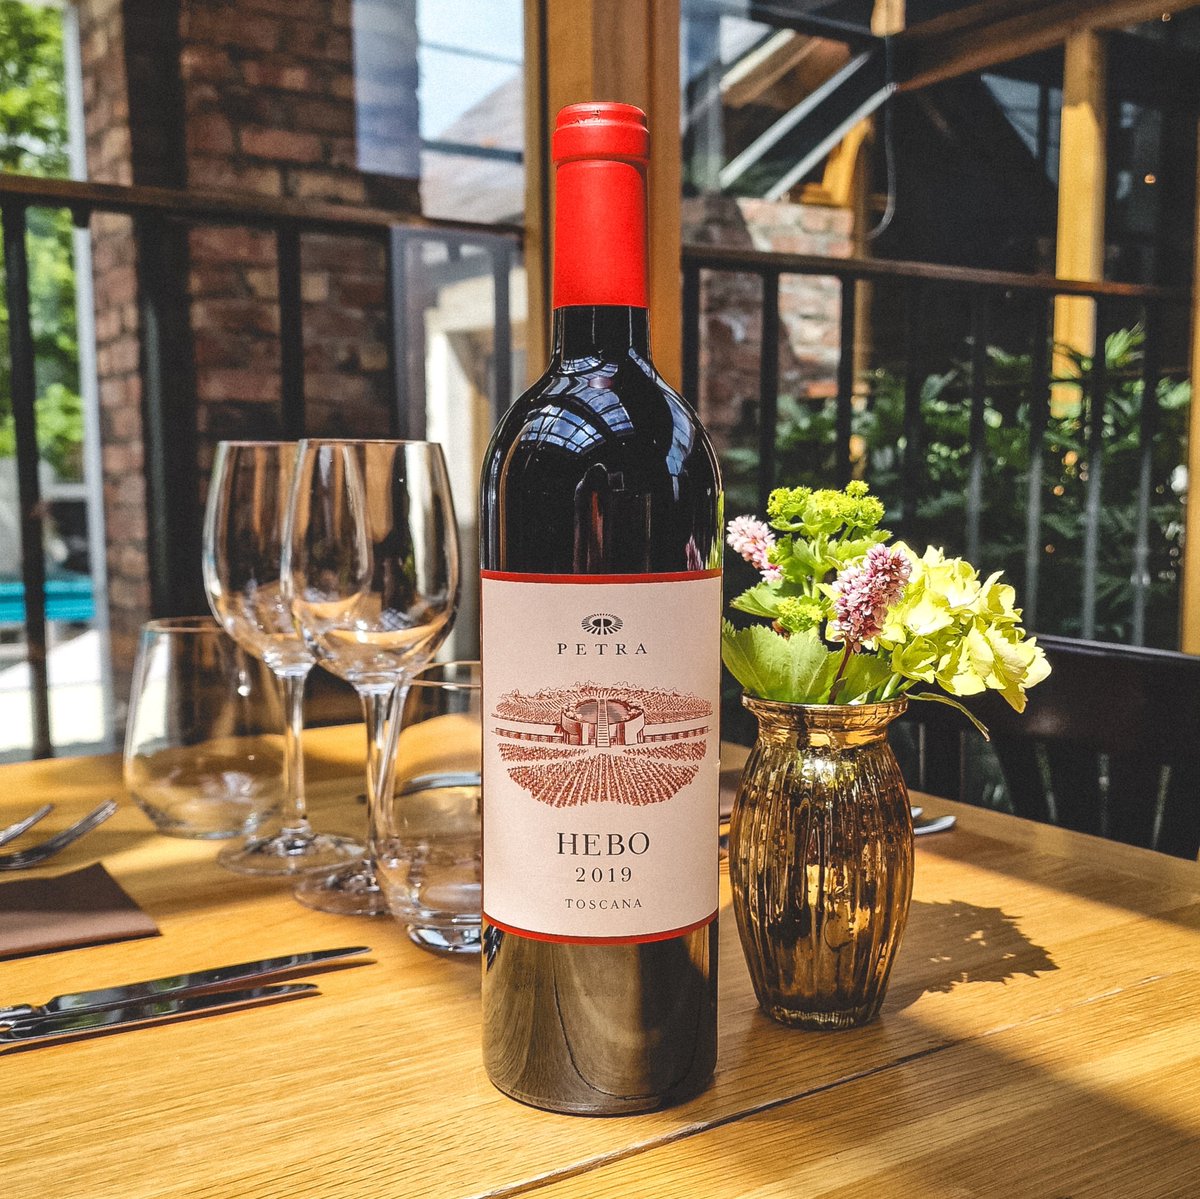 It's Wine Wednesday! Enjoy any* bottle from our award winning cellar at half price with your Dinner! We're open from 5pm, with our early 3 course Neighbourhood Menu available until 6:30pm! *Excluding our sexy new 'Single Bottle' Reserve List #goodfood #gooddrinks #greatwines